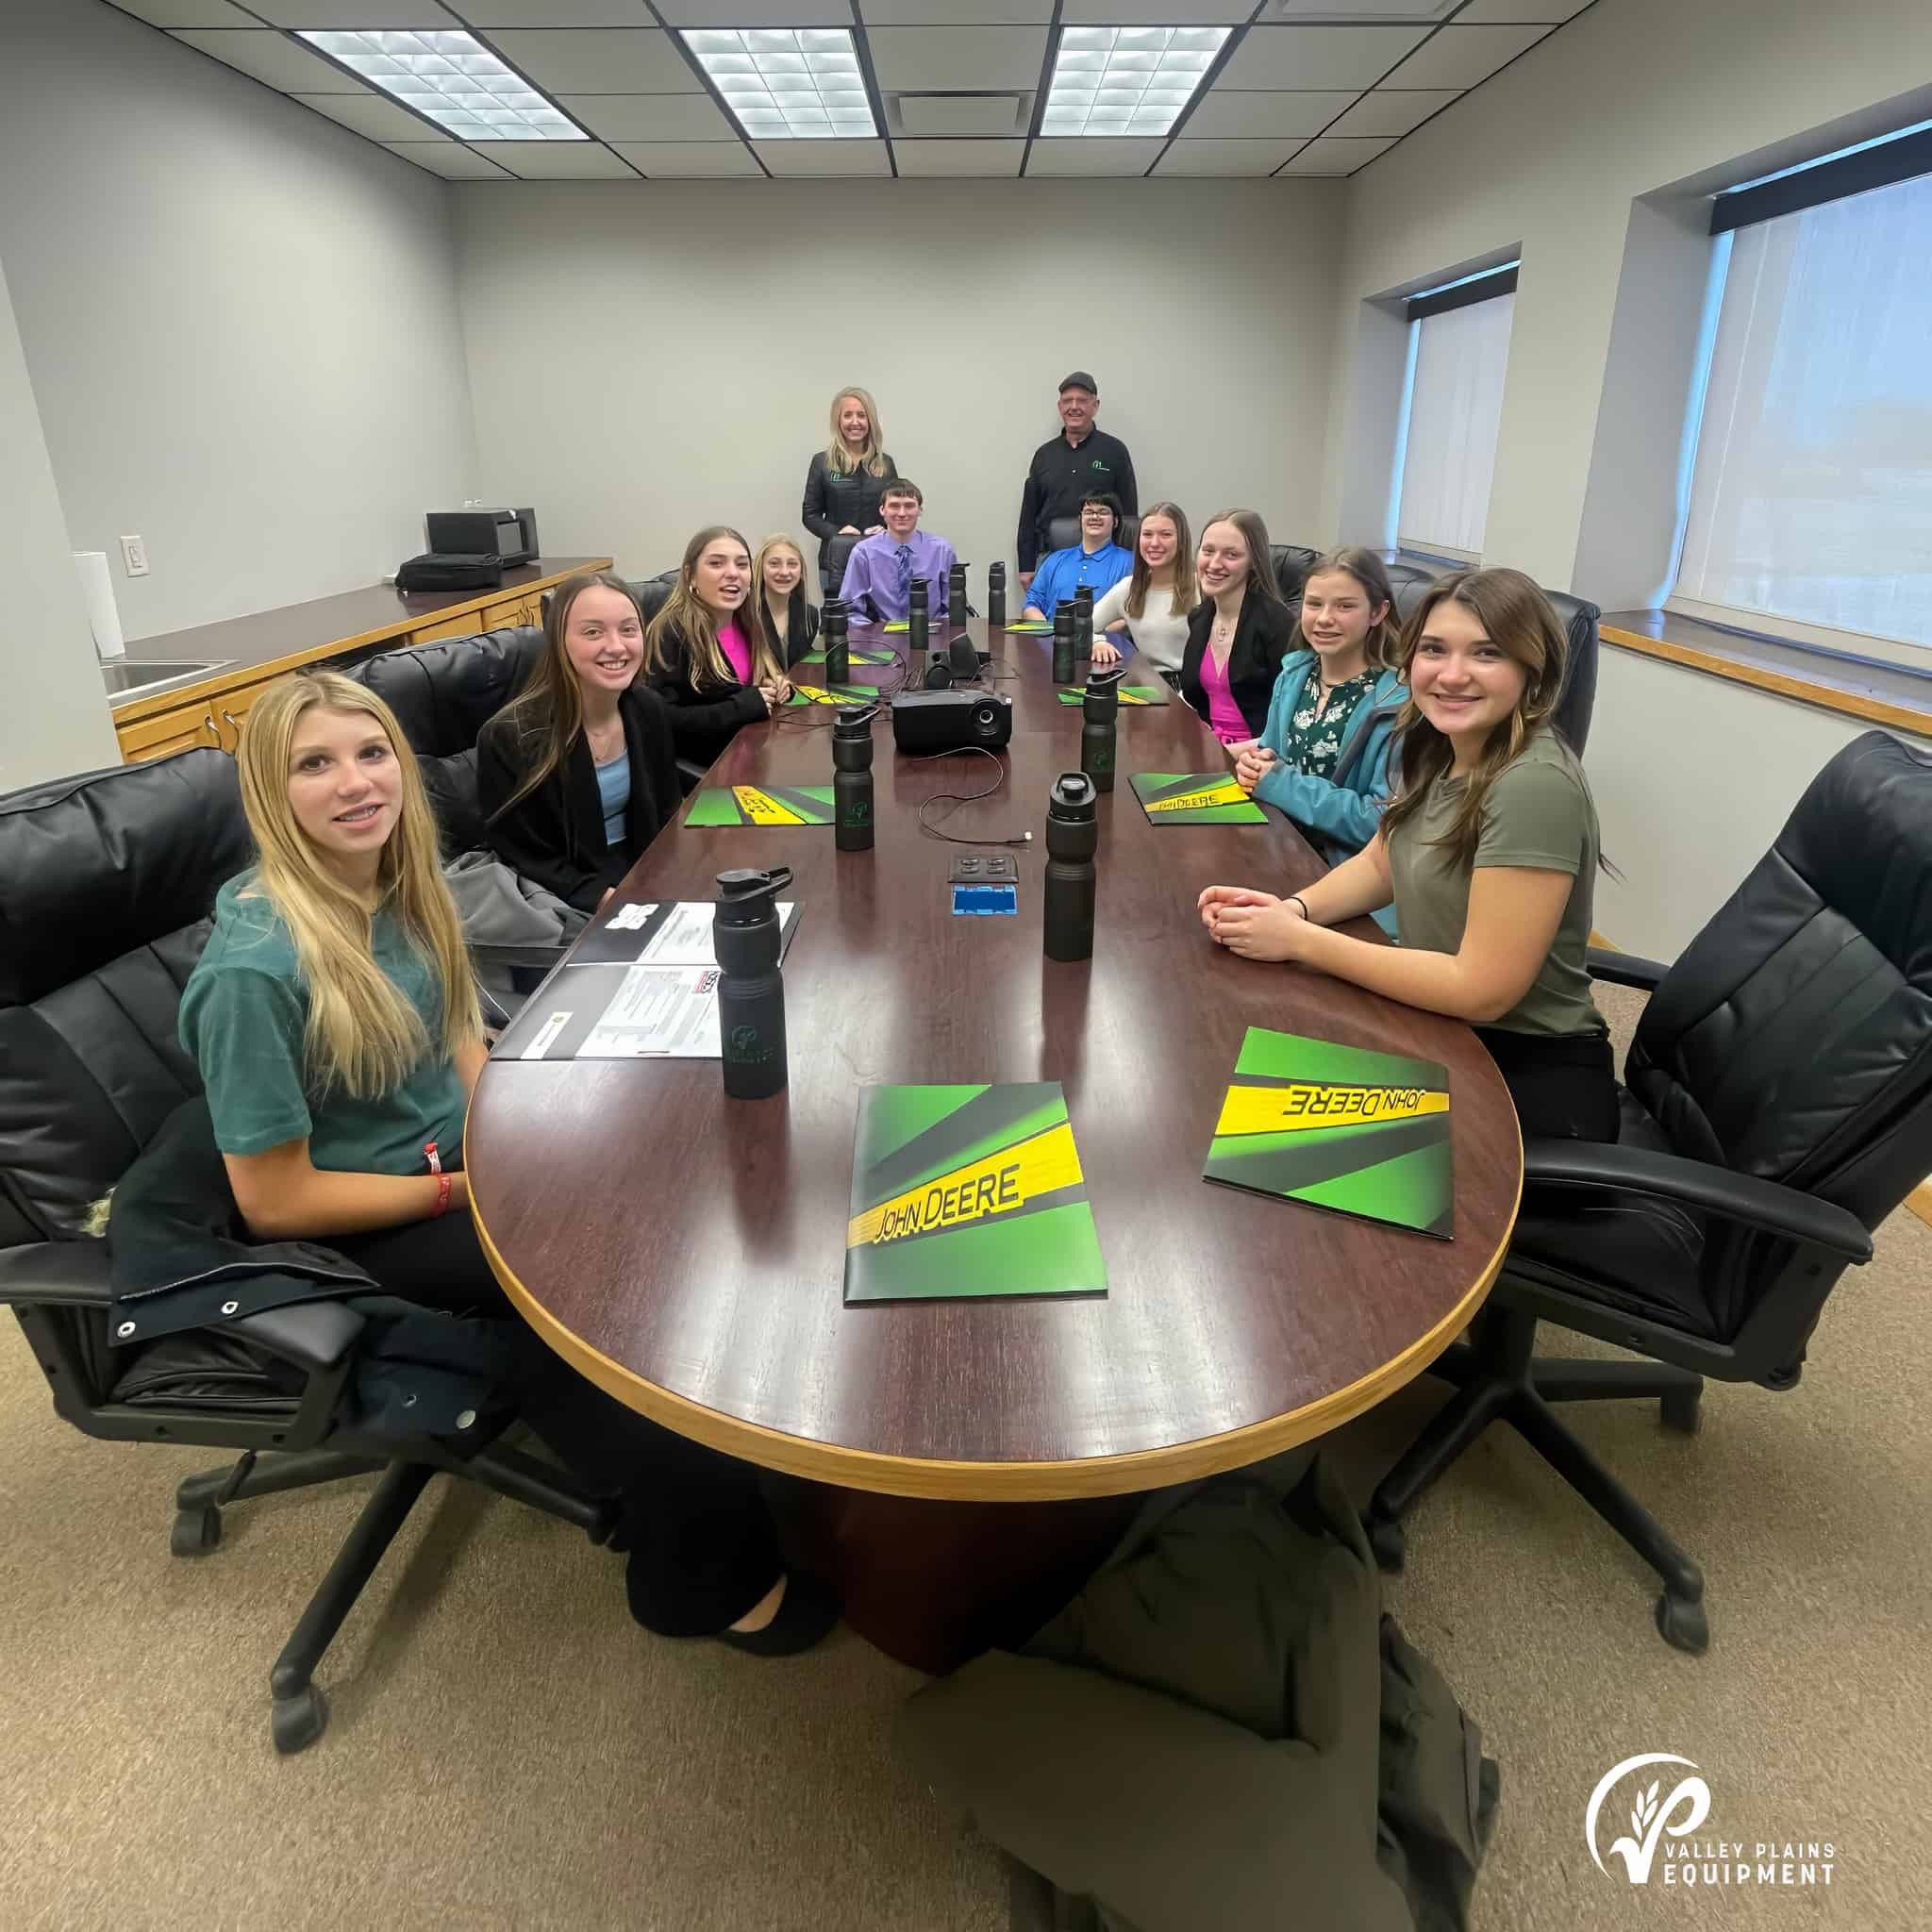 Ashley High School Future Business Leaders of America seated in Valley Plains Equipment Conference Room